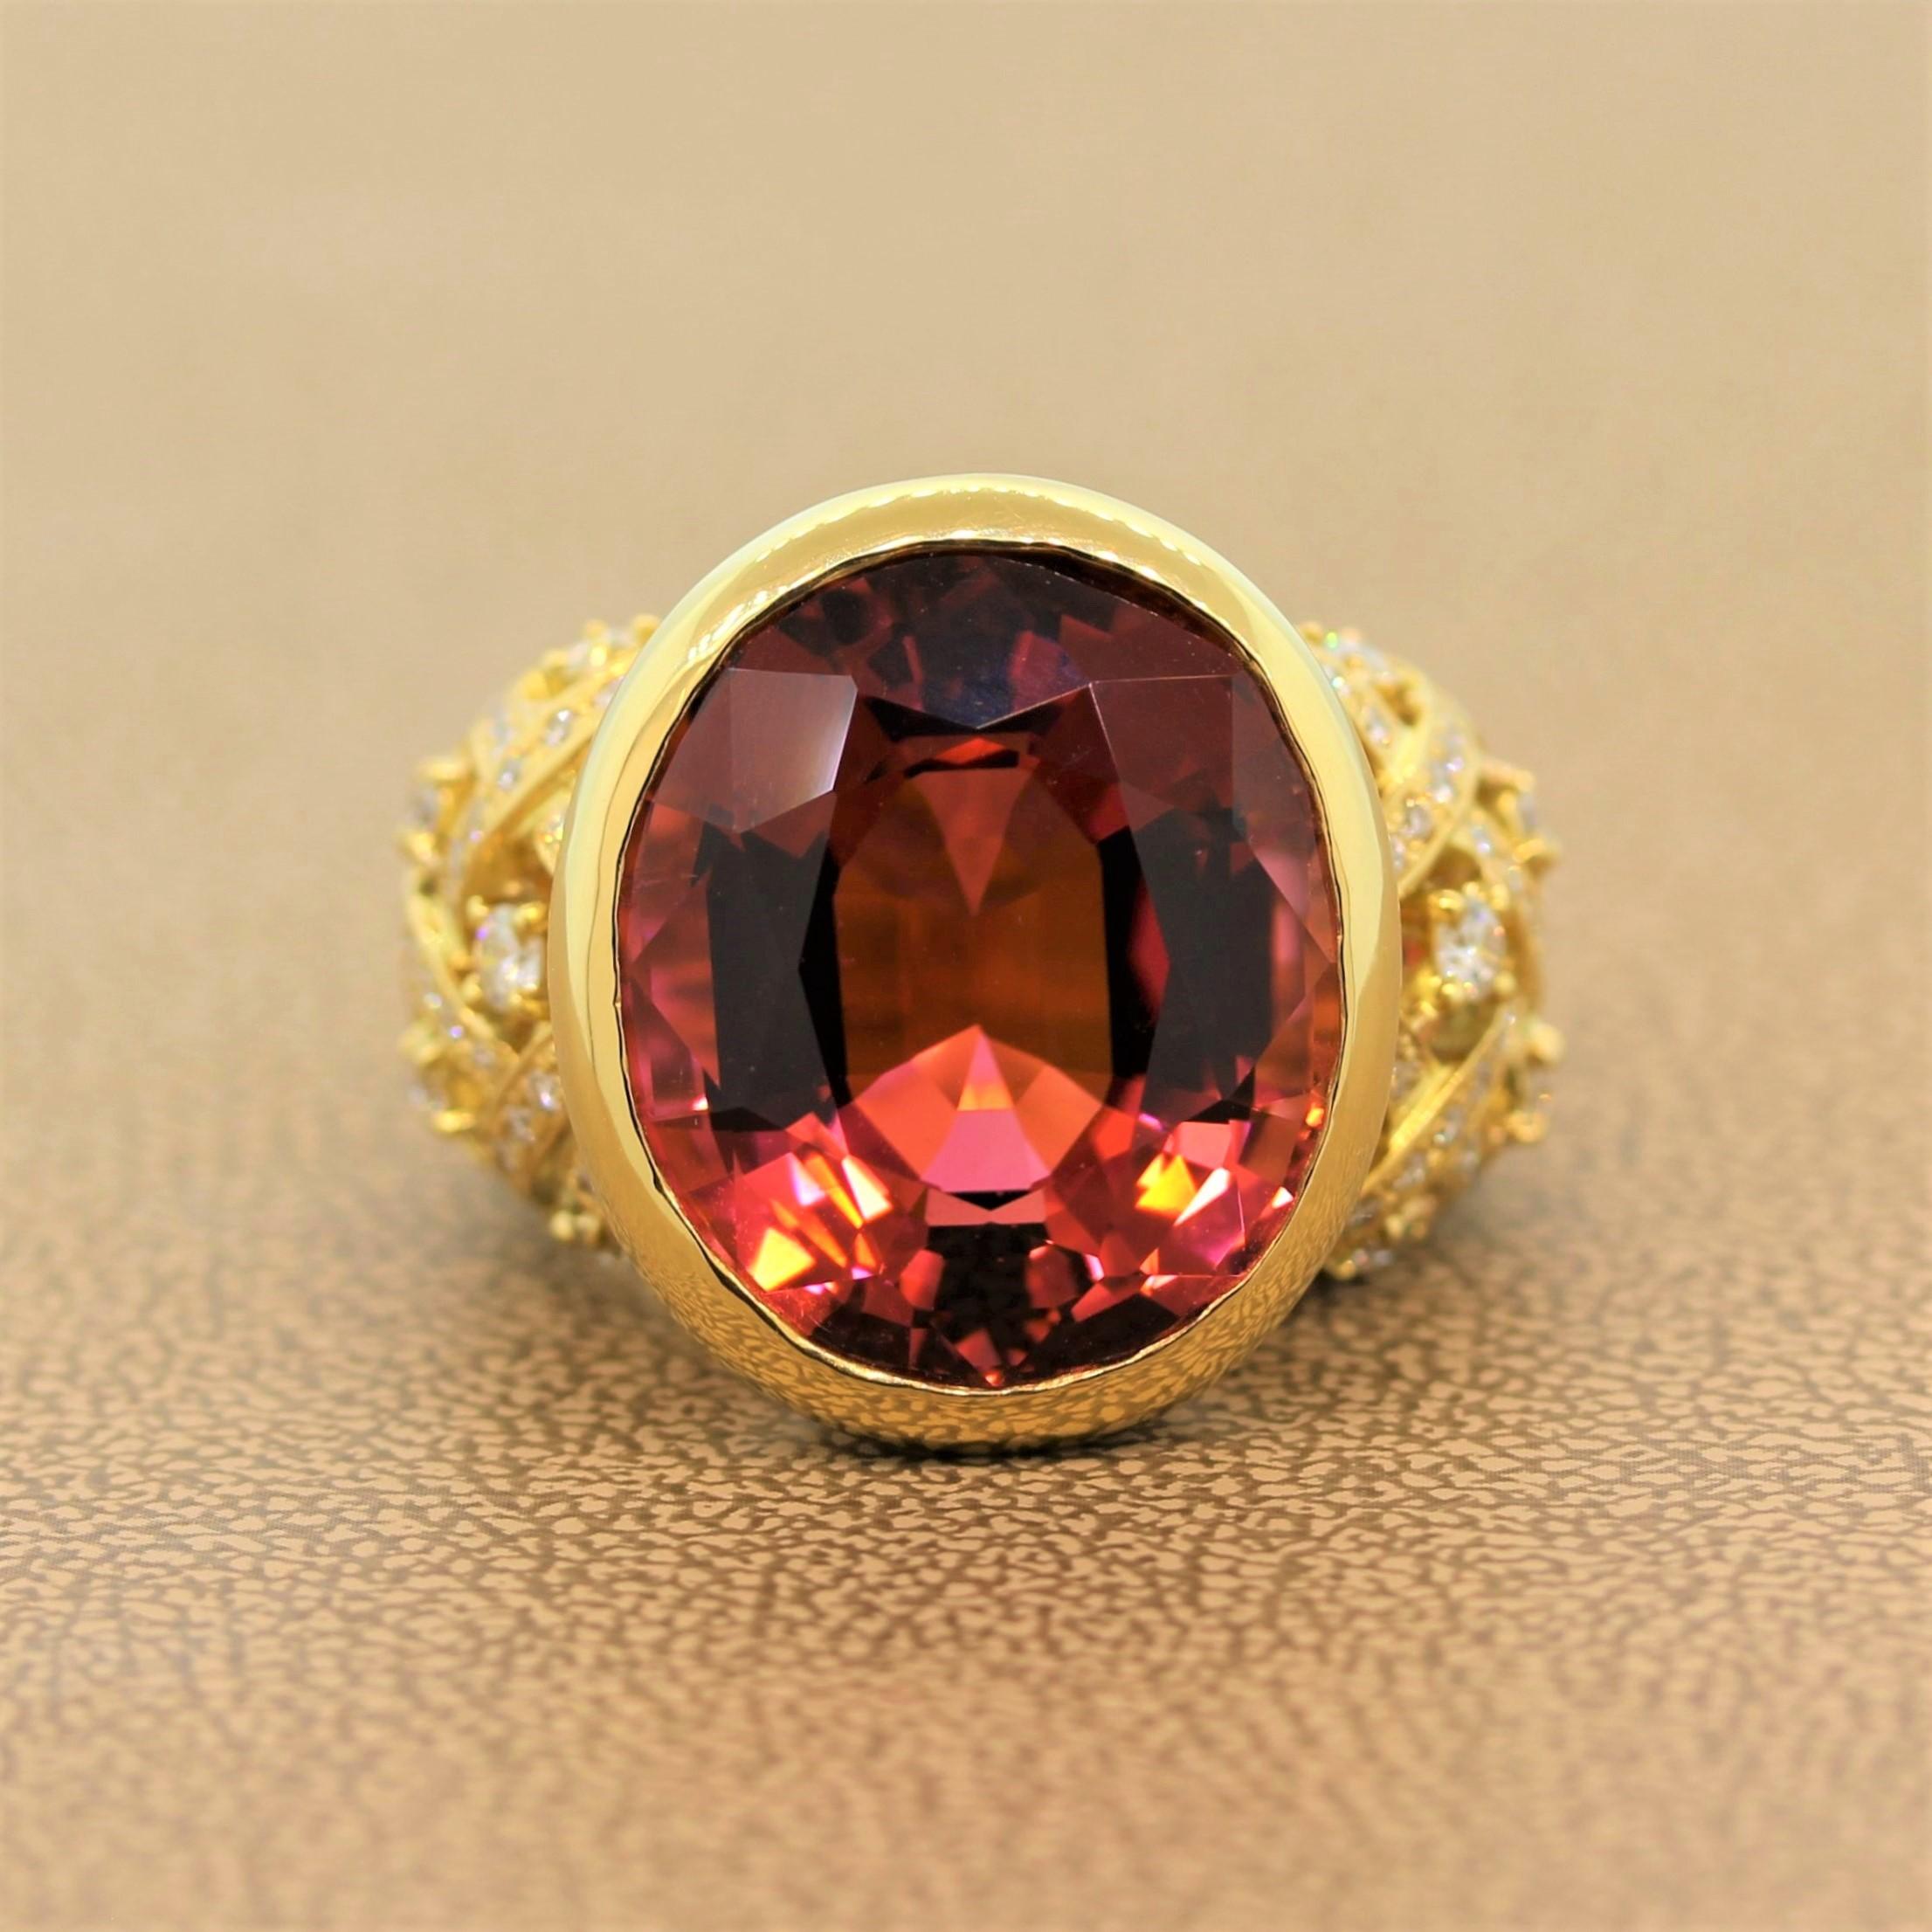 A cocktail ring featuring a captivating 21.37 carat oval shaped tourmaline. The pink gem is vibrant and eye clean. It is bezel set in an 18K yellow gold setting with 0.94 carats of round cut diamonds on the lattice designed shoulders. An exquisite